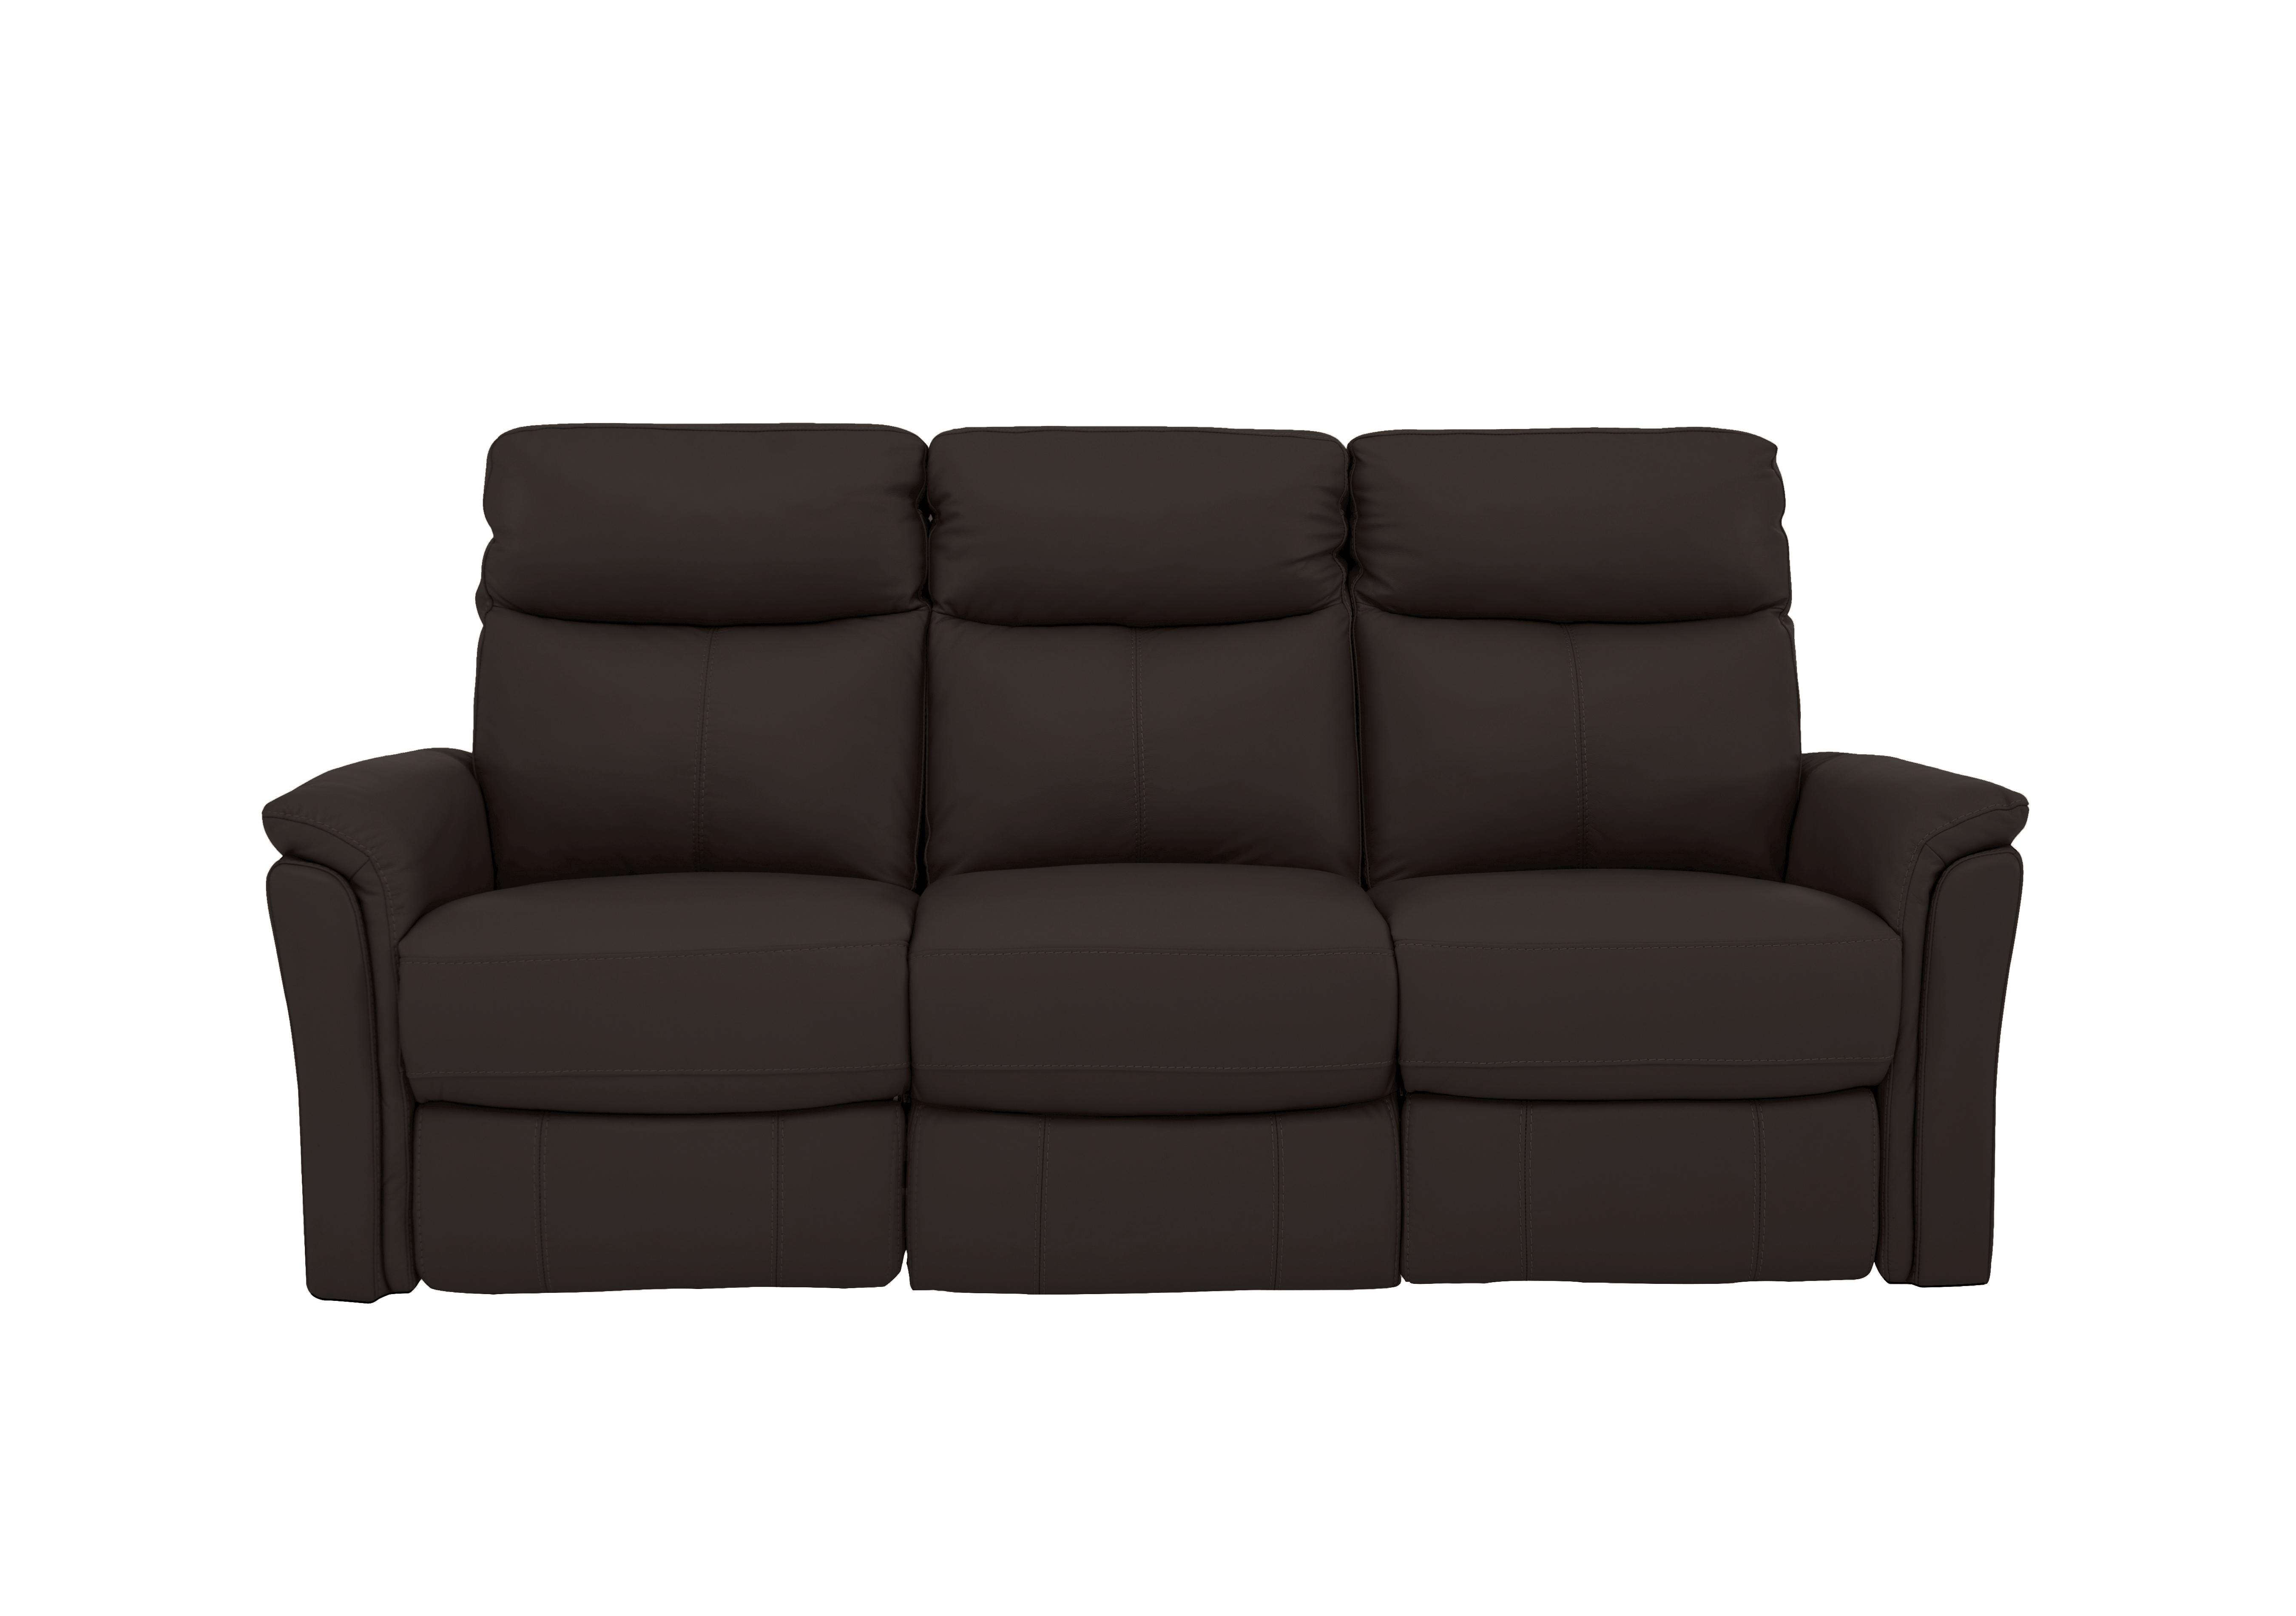 Compact Collection Piccolo 3 Seater Sofa in Bv-1748 Dark Chocolate on Furniture Village